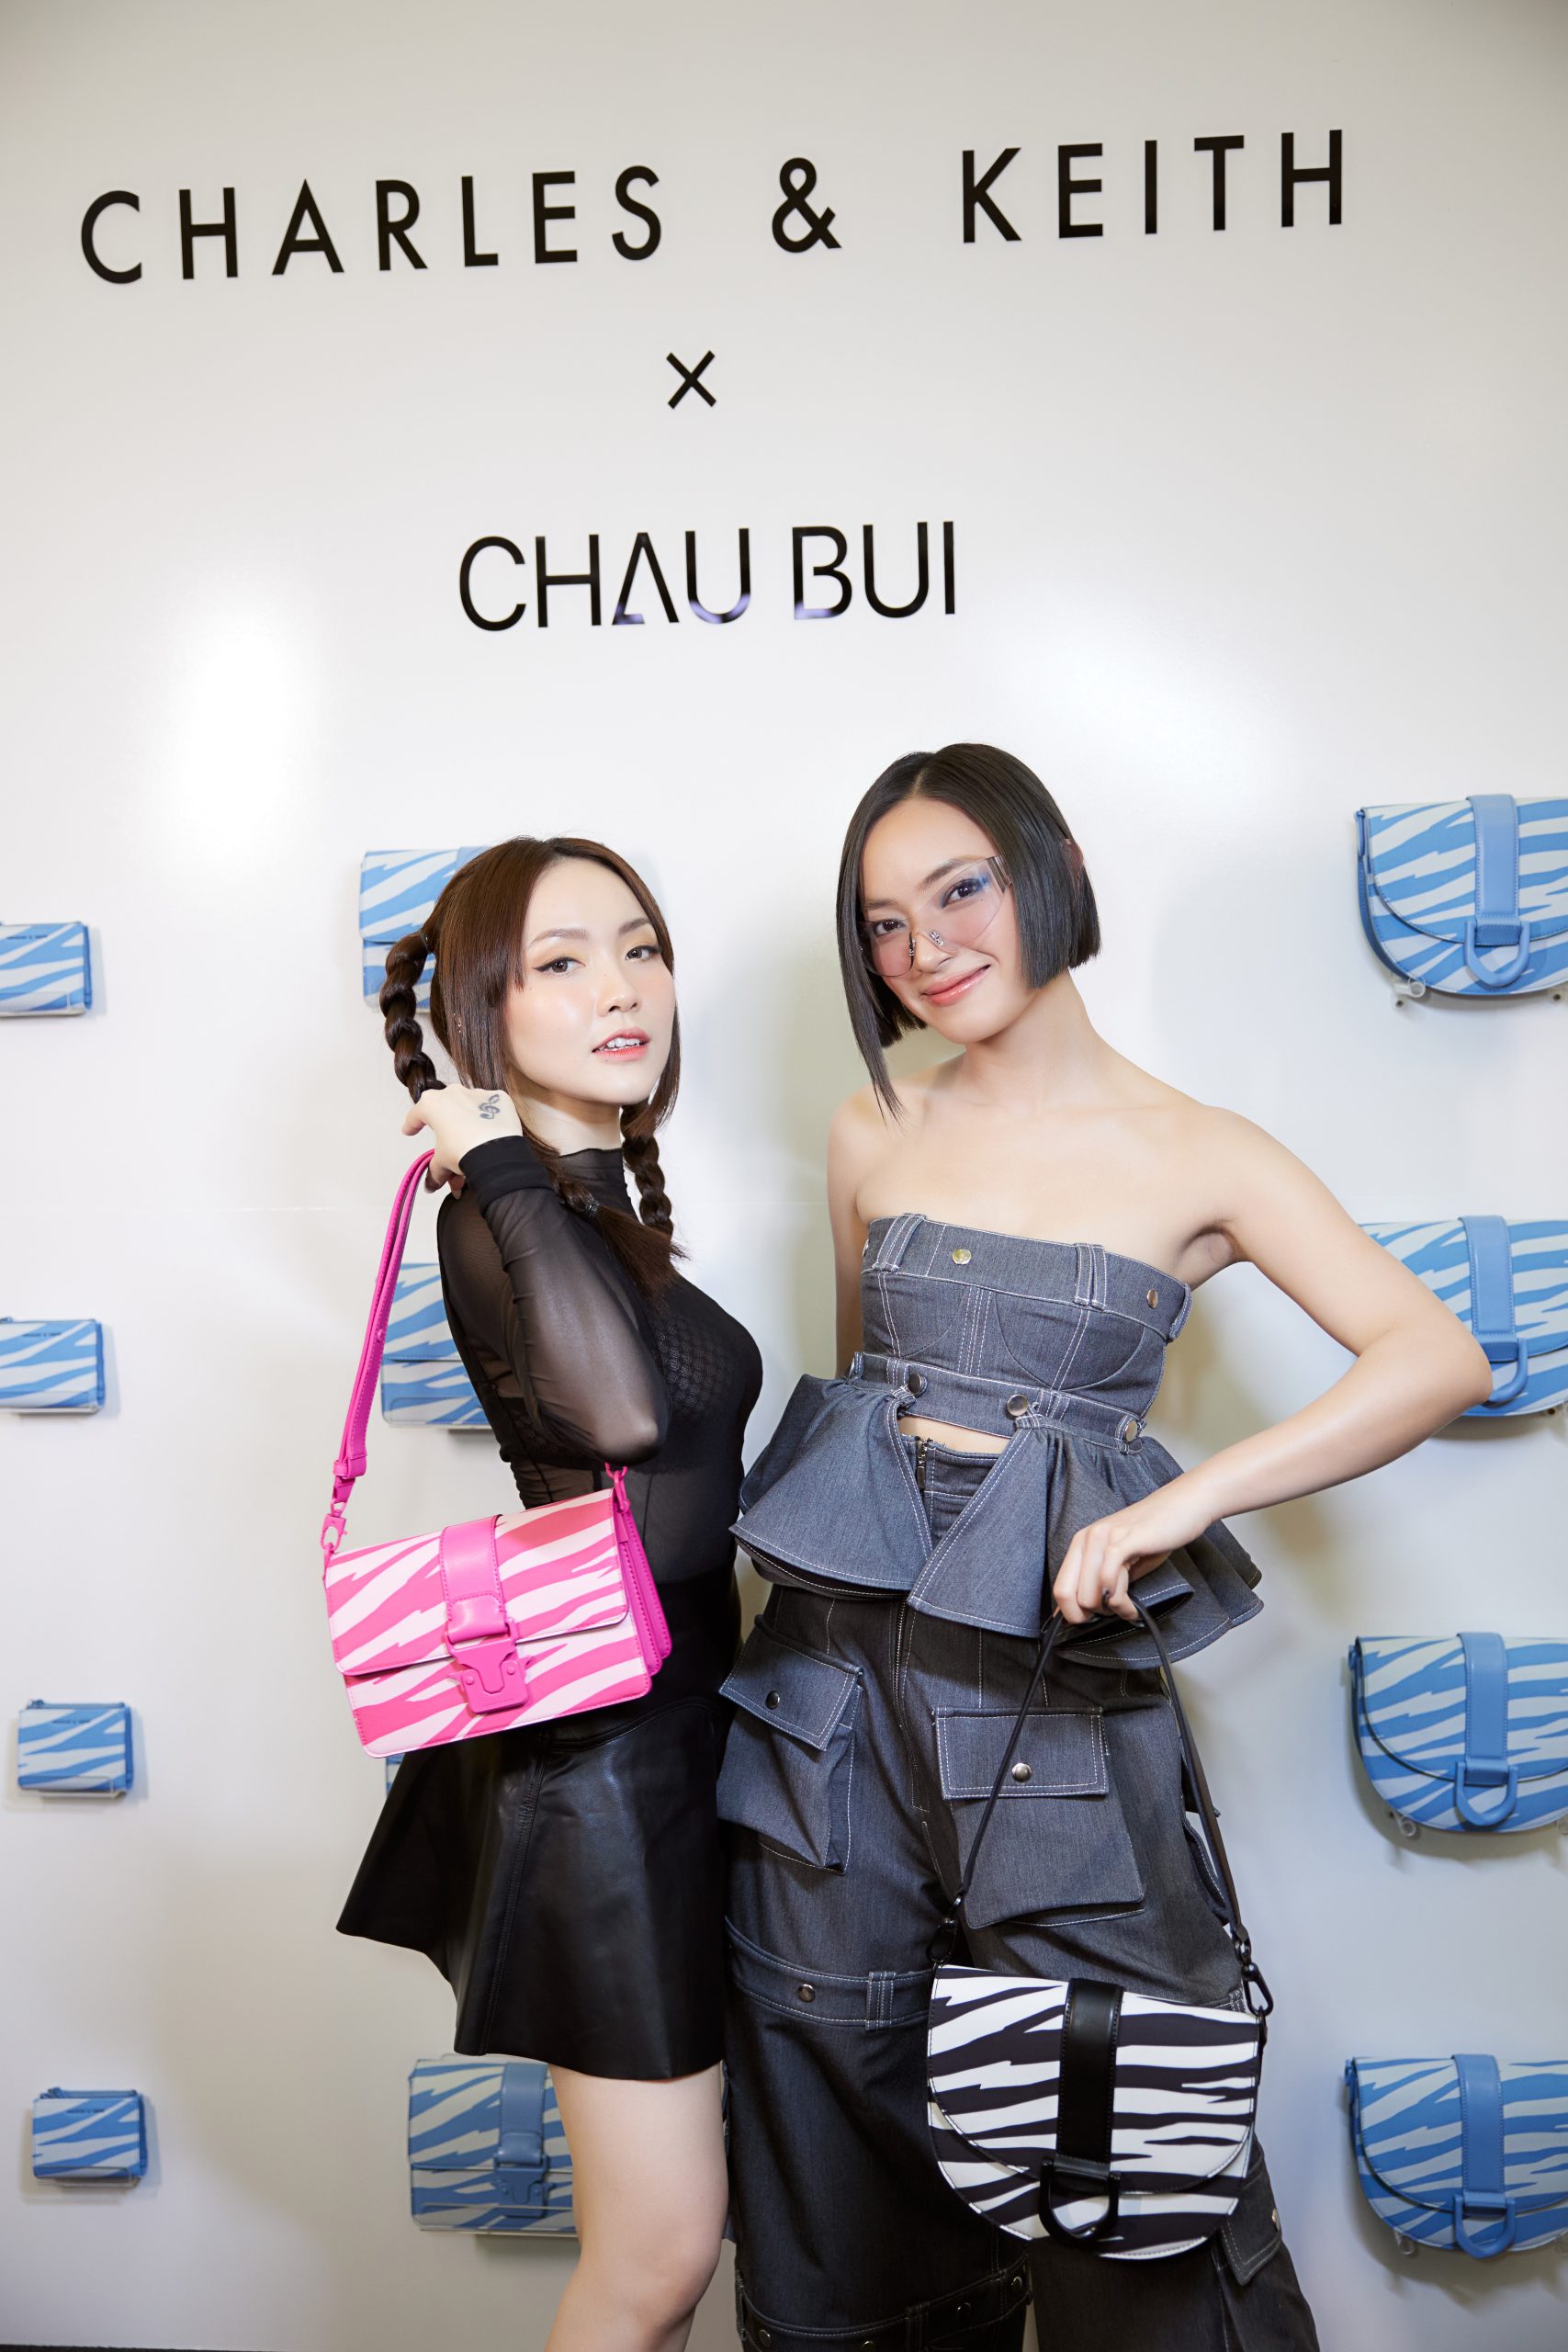 CHARLES & KEITH Collaborated With Chau Bui To Launch An Exclusive